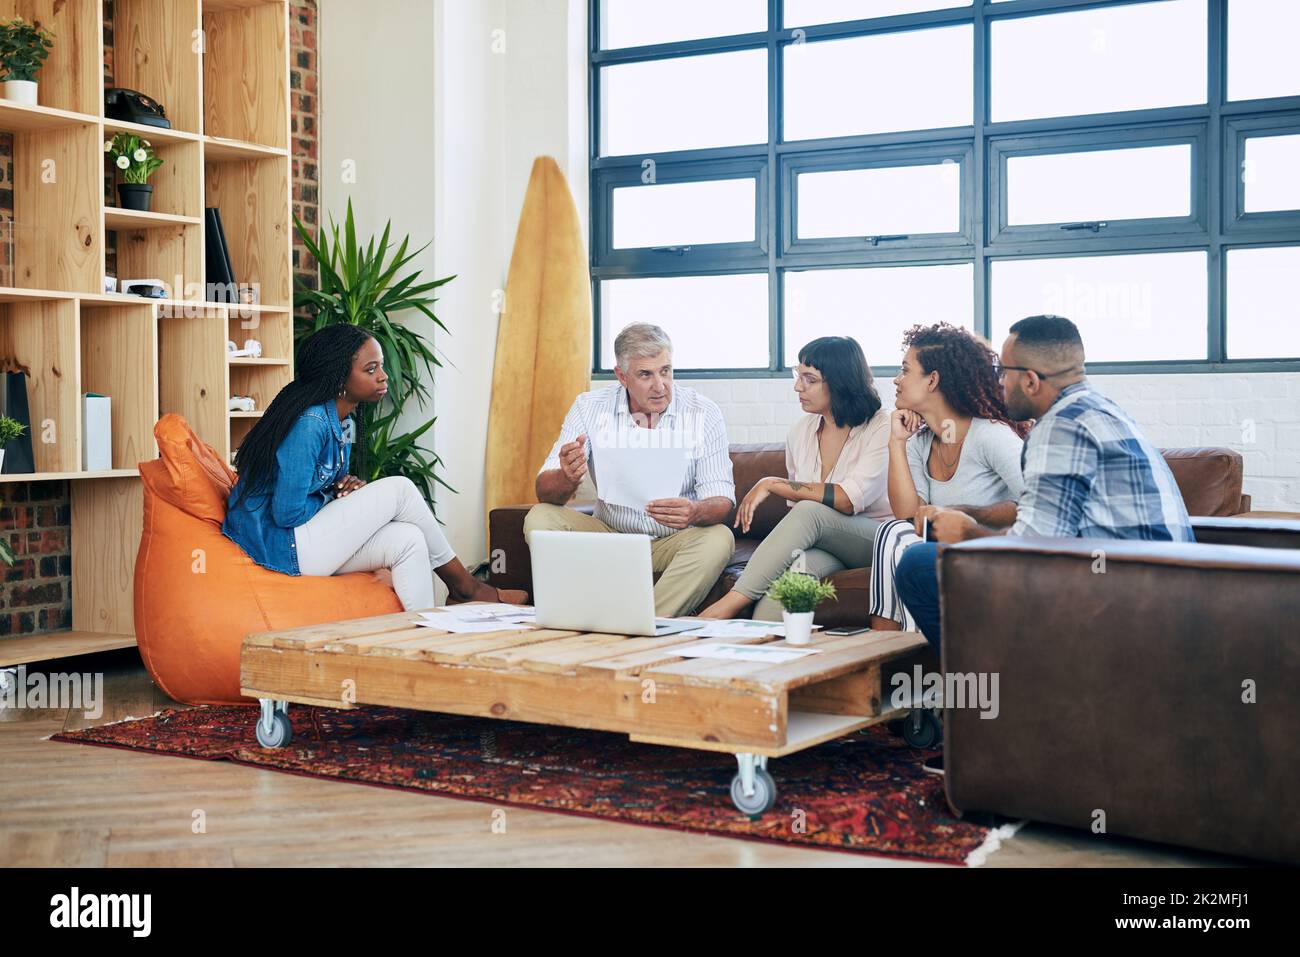 Using his position of power wisely. Shot of a group of colleagues collaborating in a modern office. Stock Photo